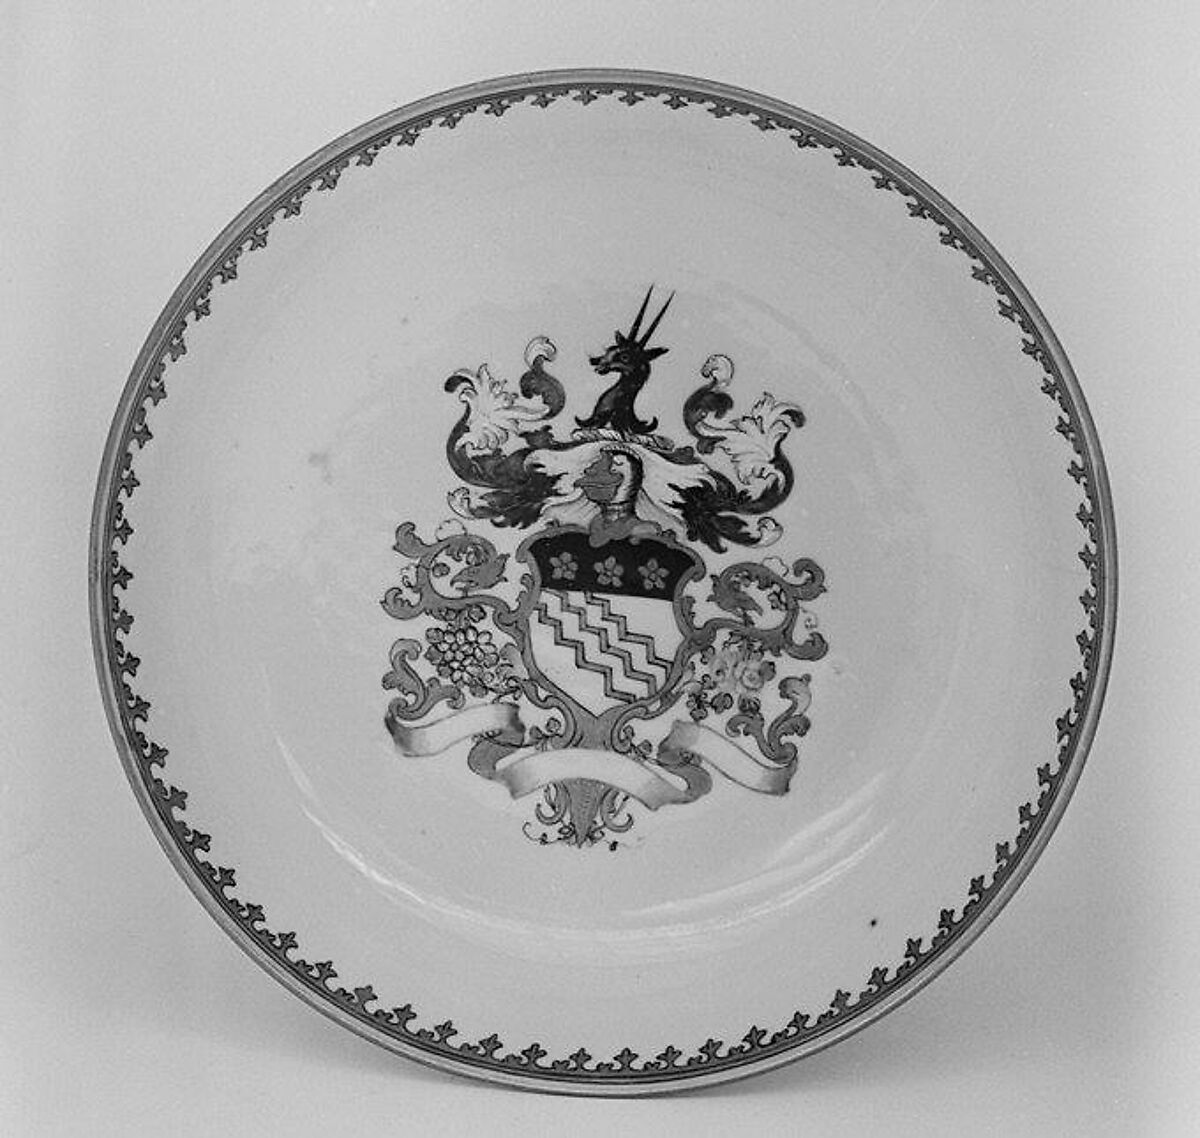 Saucer (part of a service), Hard-paste porcelain, Chinese, for British market 